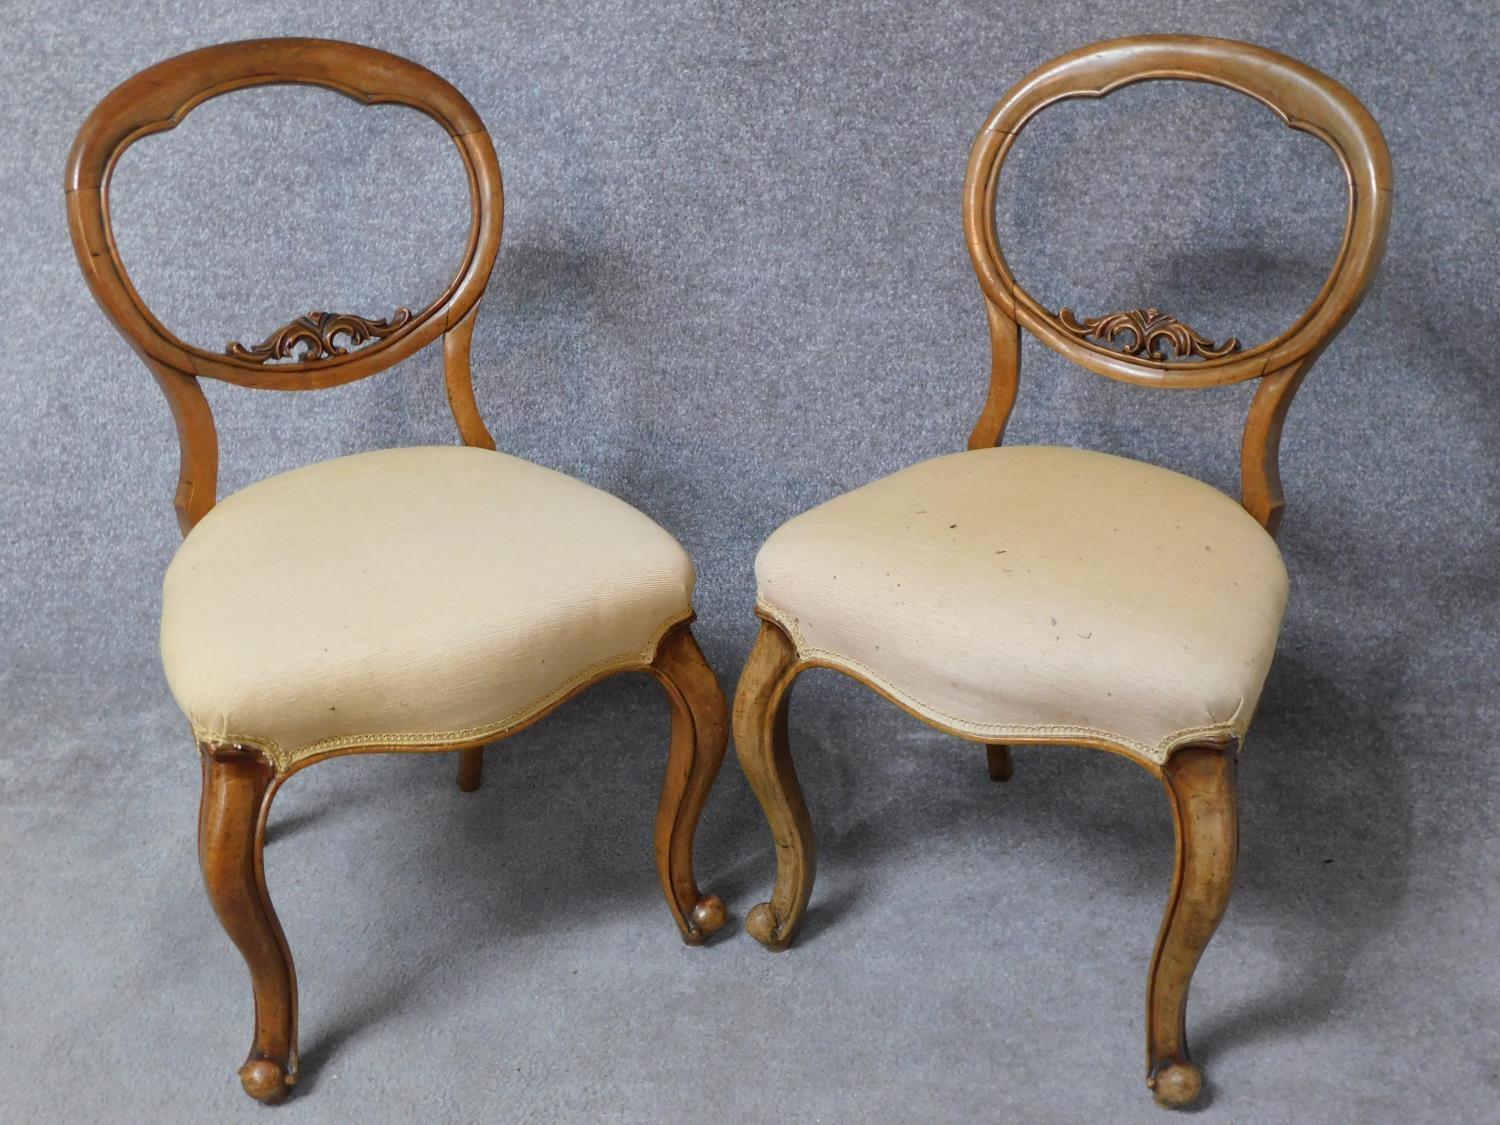 A pair of Victorian walnut balloon back dining chairs in damsk upholstery on cabriole supports. H.